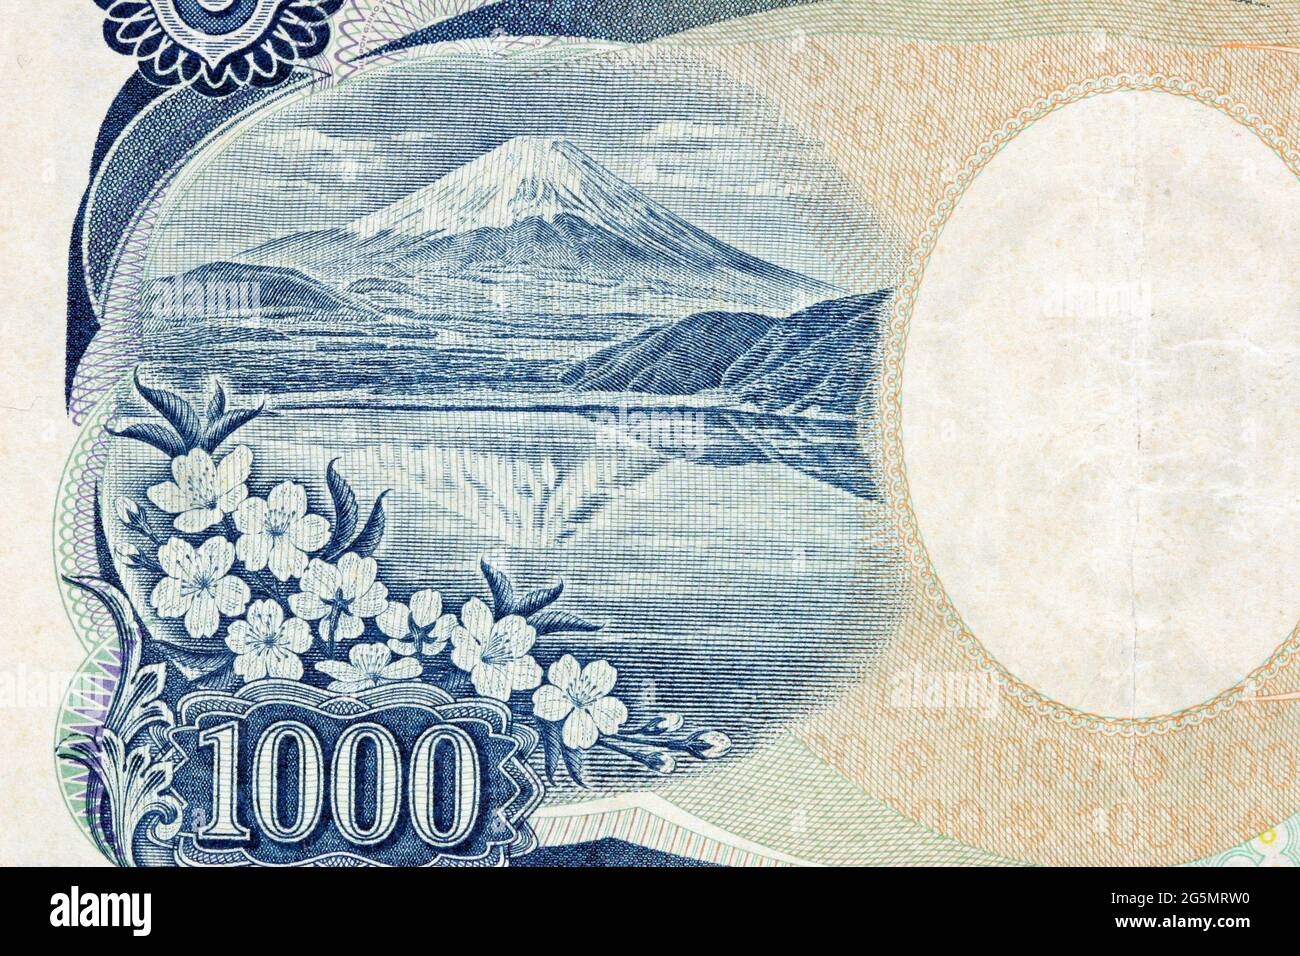 Close-up of Mt. Fuji and Cherry Blossoms on the reverse side of the Japanese One Thousand Yen Banknote (Yen 1000) Series E Stock Photo